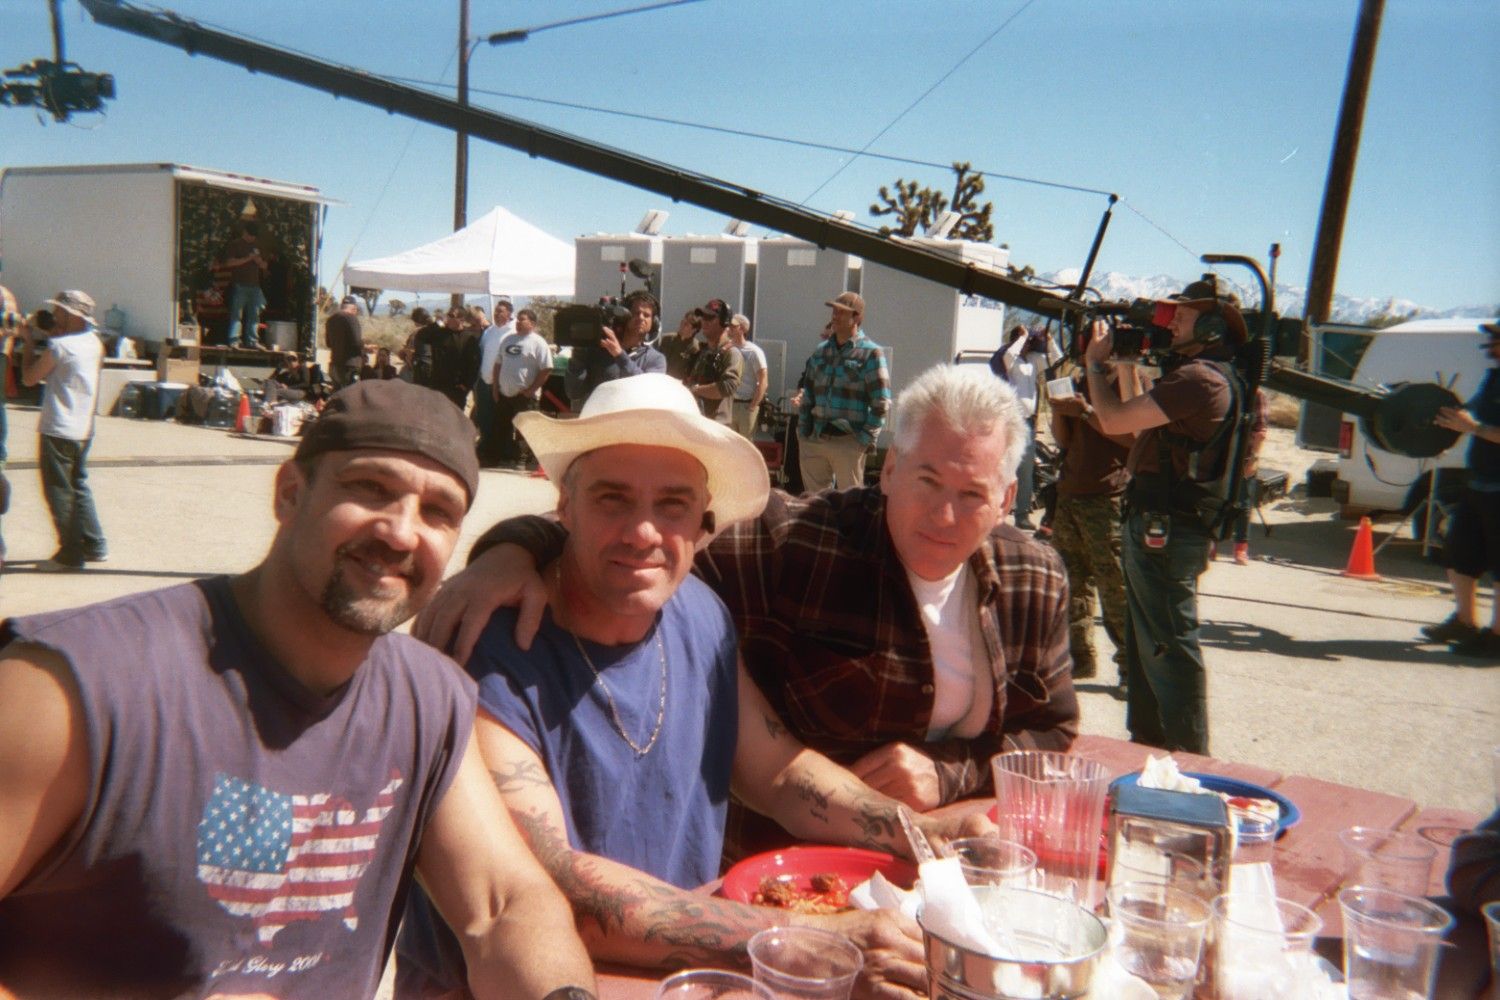 Bryan Hanna, Dave Haddock,and Brian Hipp,on Set playing Truckers.